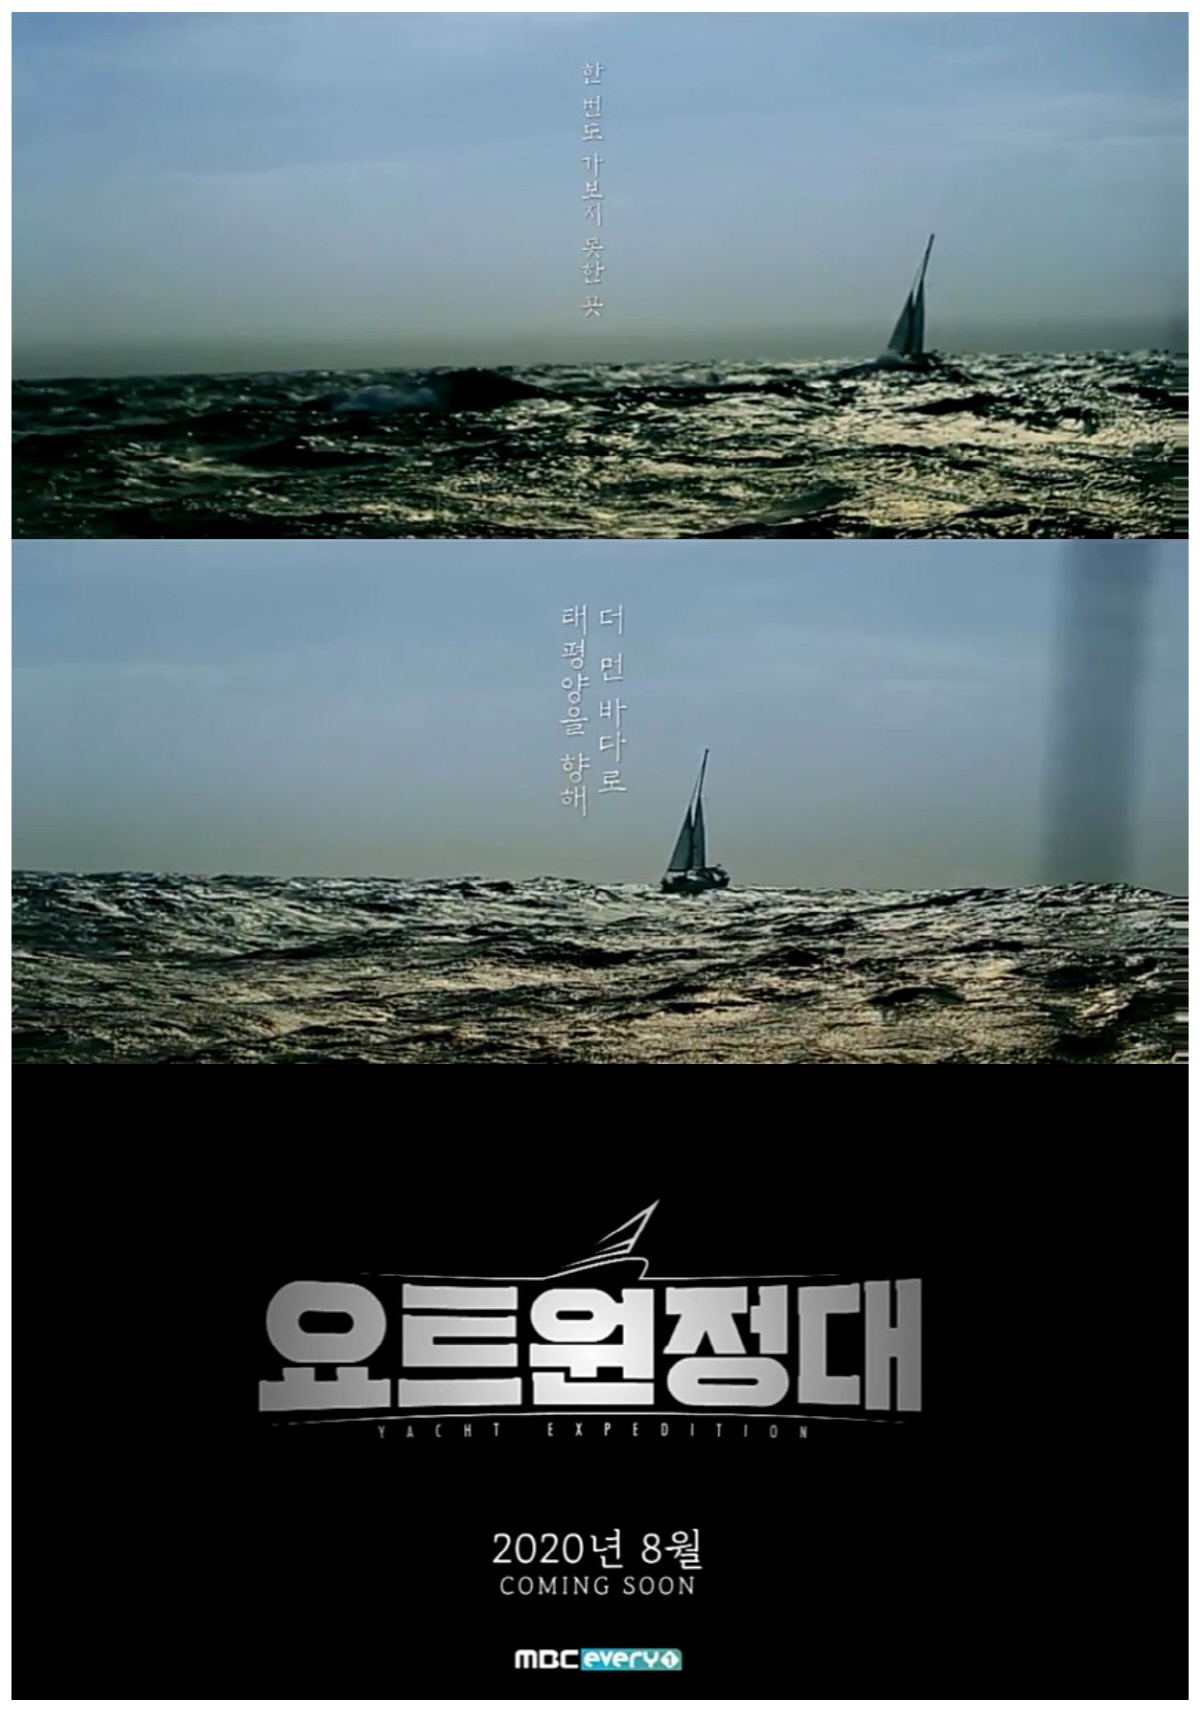 MBC Everlons new entertainment program yacht expedition released its first teaser video.The yacht Expedition, which is scheduled to be broadcasted in August, is a documentary entertainment program featuring the process of Top Model on the Pacific Ocean voyage by four men who dreamed of adventure.I will take the course of experiencing nature and finding the hope and value of life in the journey to Pacific Ocean on the yacht.In the public footage, you can see the yacht expedition going to Pacific Ocean against rough waves.The text To a Farther Sea to Pacific Ocean is emerging, raising expectations.Yacht Expedition will release various teaser videos until broadcast.It is expected that the charm of yacht expedition will be able to be seen in advance from the grandeur of Pacific Ocean that has not been seen on the air to the top model of the adventure and the unexpected crisis situation.Jin Goo, Choi Siwon, Chang Kiha, and Song Ho-joon, who have dreamed of adventure, are also watching points.The four people who met for the first time through yacht expedition are wondering what story they will make during the long voyage.Meanwhile, Choi Siwon has released a photo of his sailing with an article Im back on his SNS.In the photo, there is a picture of Choi Siwon, who has a thick beard.The yacht expedition, which will show the world of the unique genre, the ocean and yacht, will be broadcasted at MBC Everlon in August.